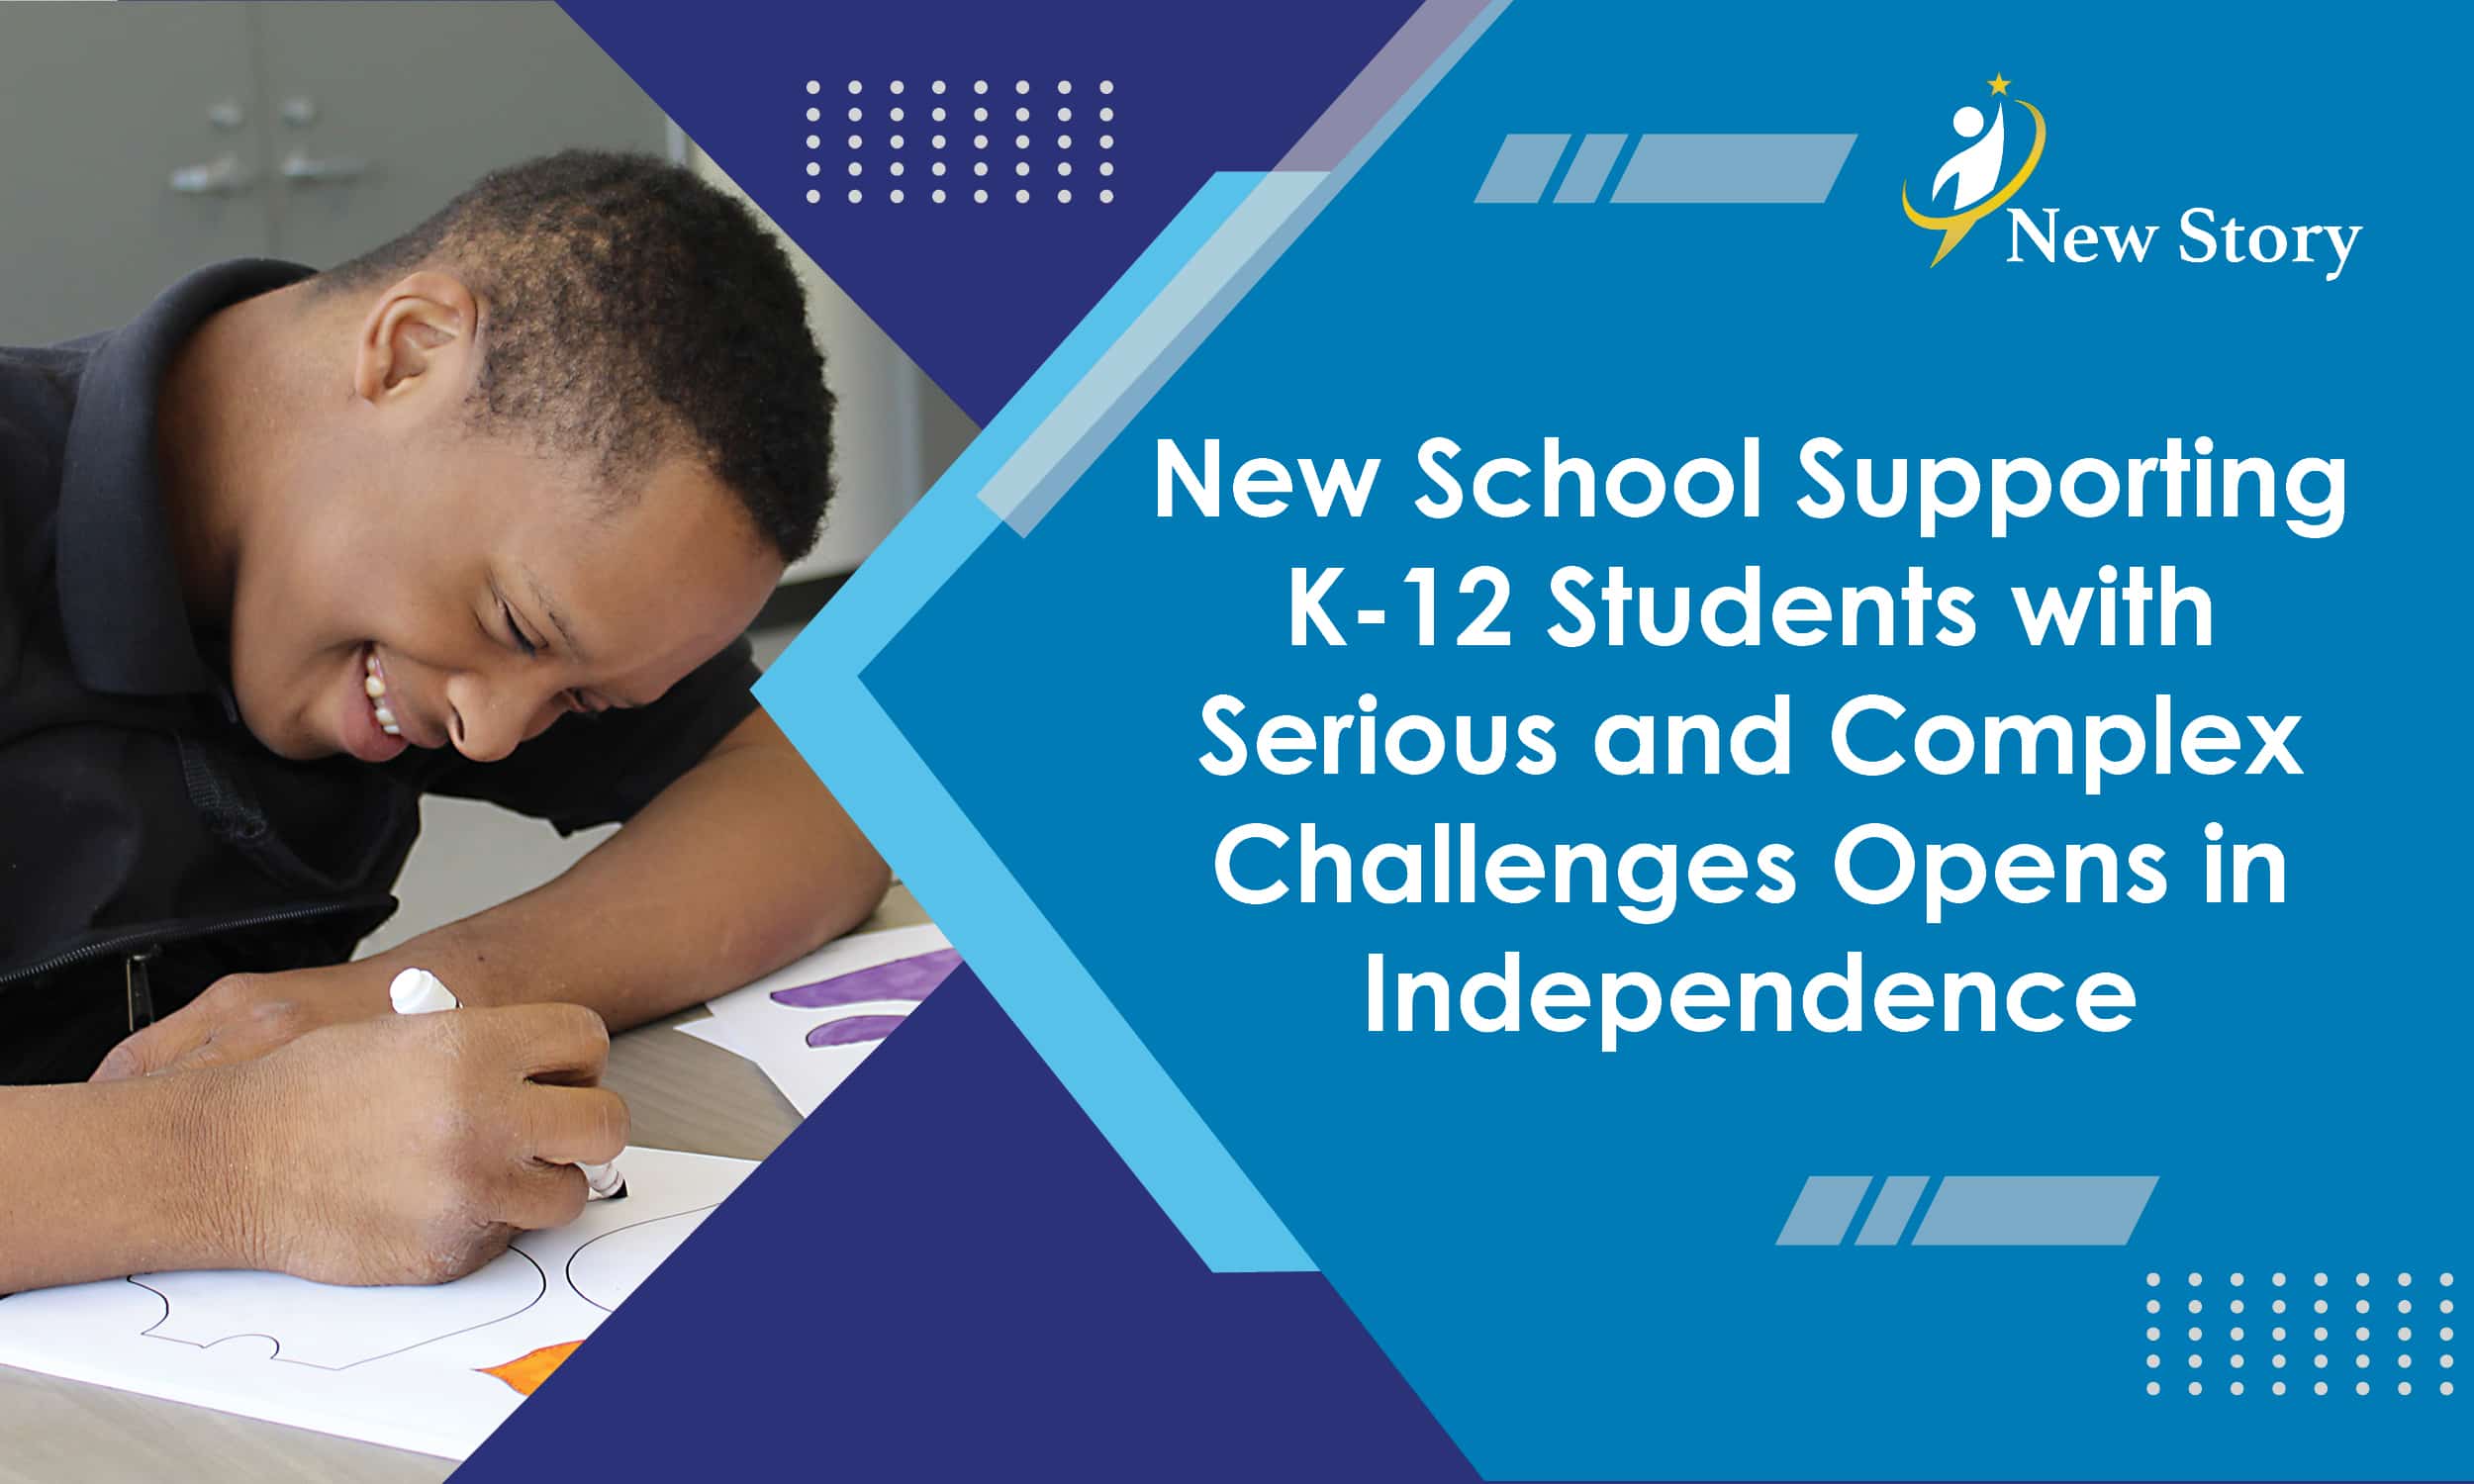 New School Supporting K-12 Students with Serious and Complex Challenges Opens in Independence